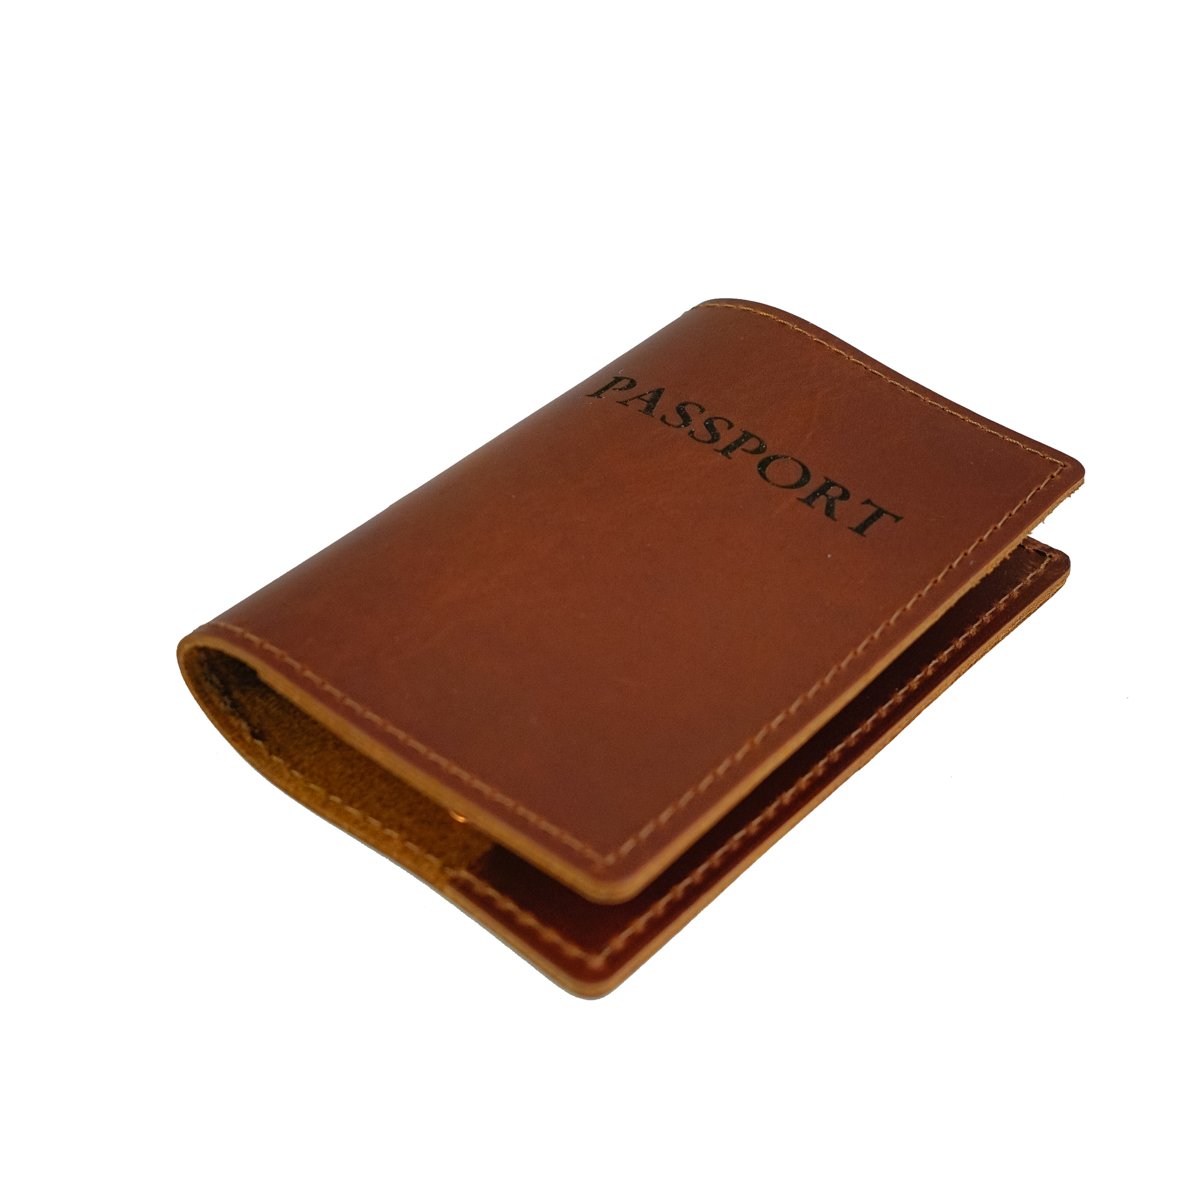 The Expedition Personalized Leather Passport Cover